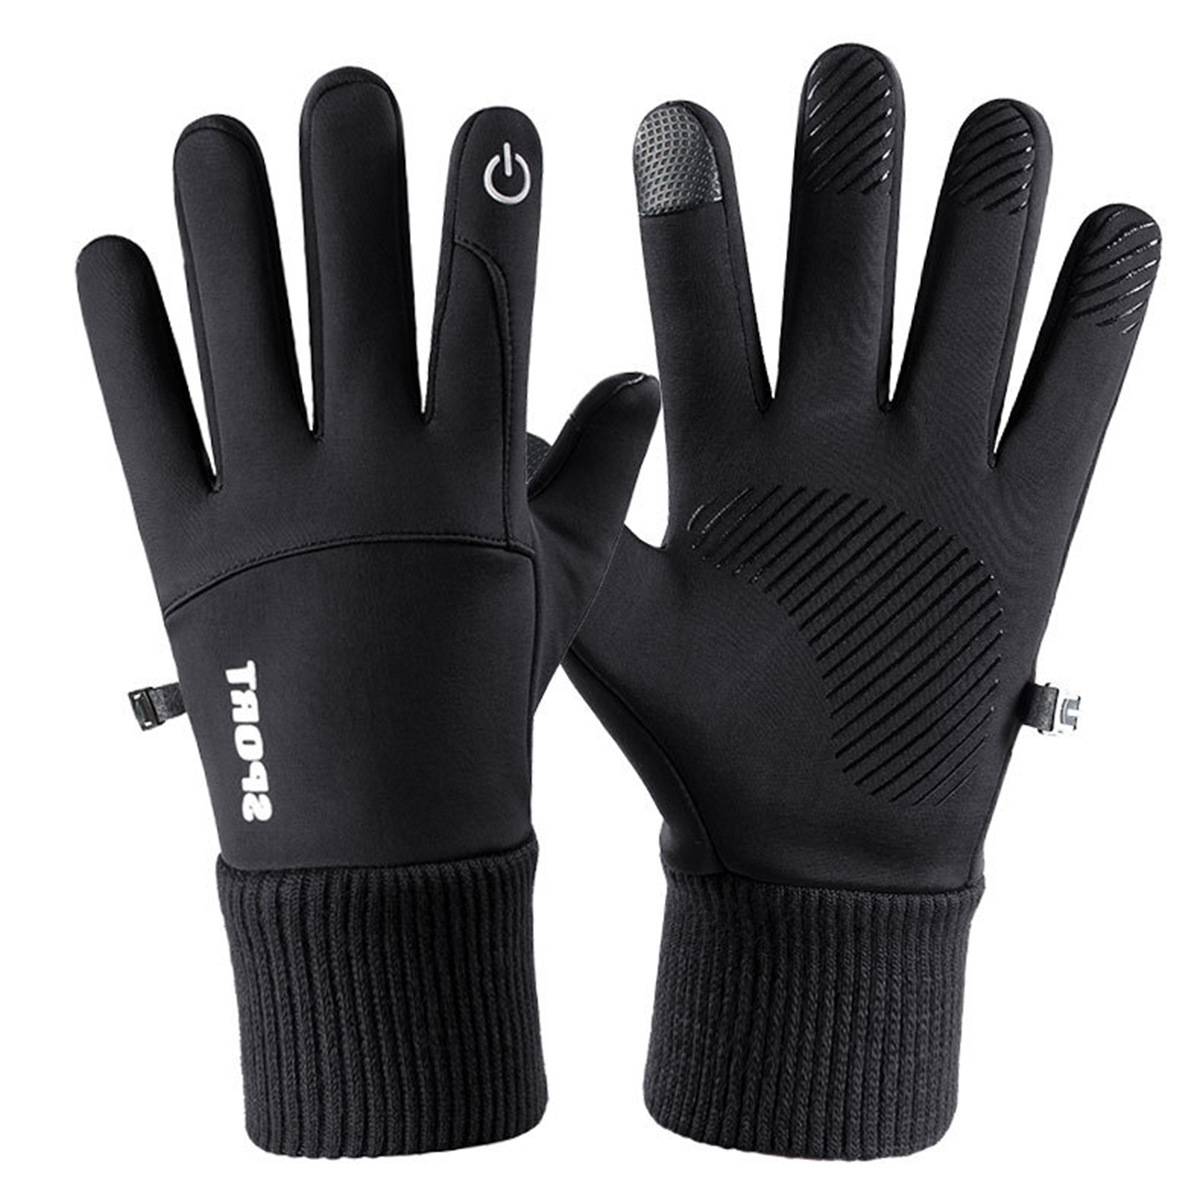 Winter-Warm-Waterproof-Windproof-Anti-Slip-Touch-Screen-Outdoors-Motorcycle-Riding-Gloves-1781887-5